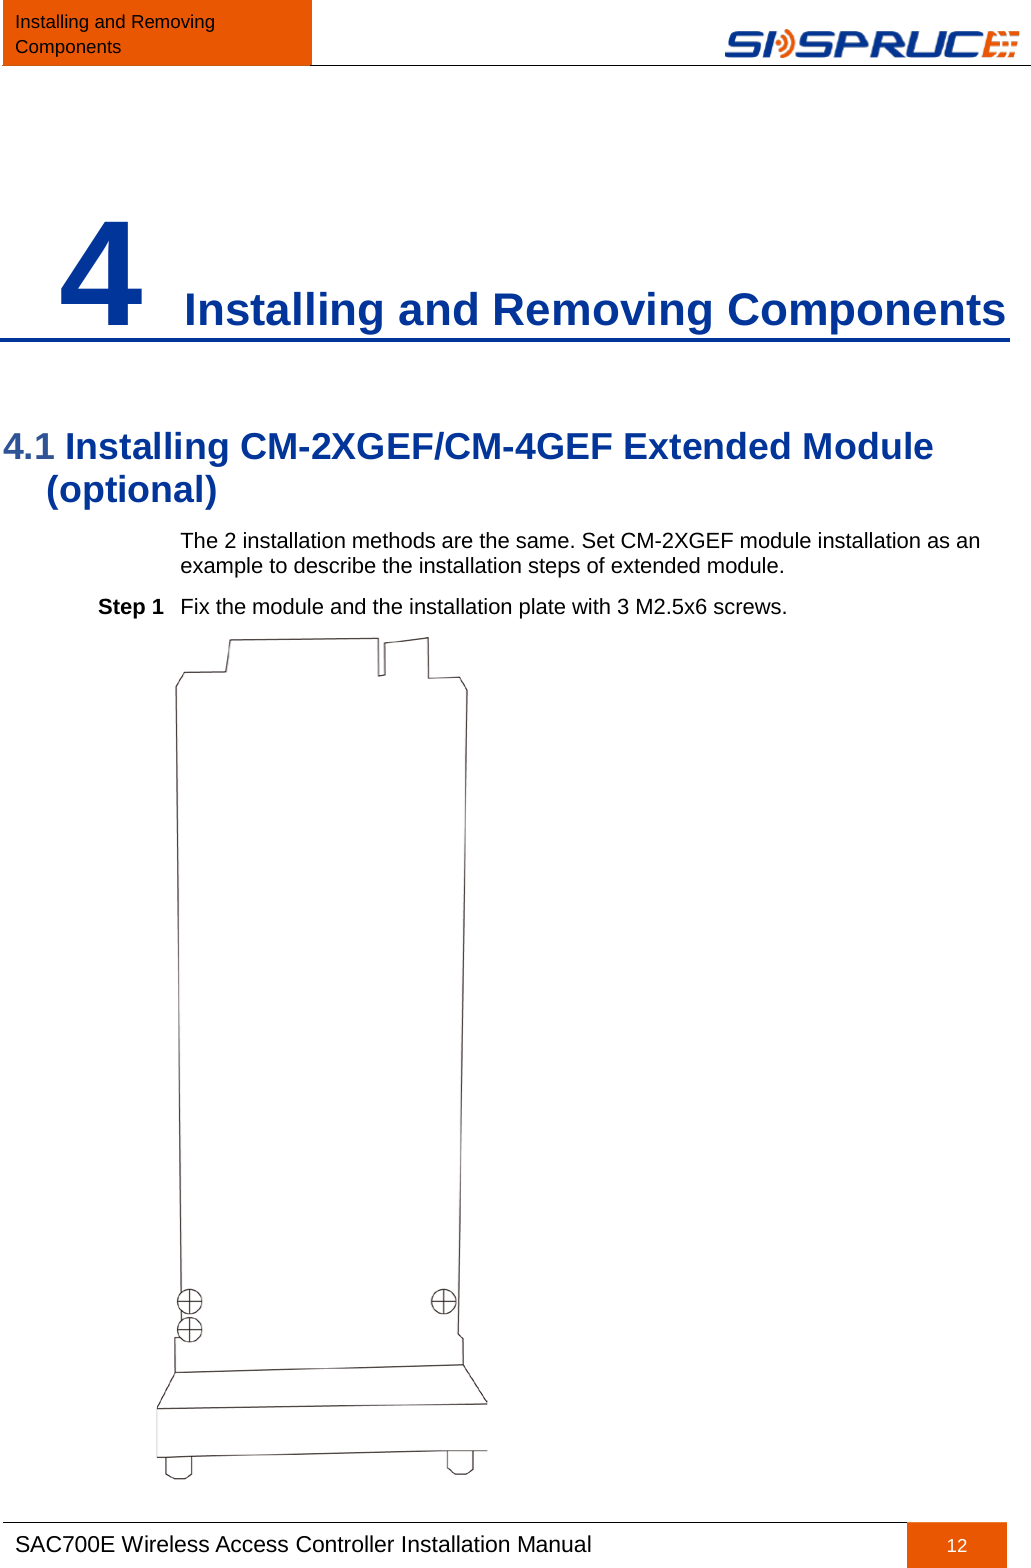 Installing and Removing Components   SAC700E Wireless Access Controller Installation Manual 12  4 Installing and Removing Components 4.1 Installing CM-2XGEF/CM-4GEF Extended Module (optional) The 2 installation methods are the same. Set CM-2XGEF module installation as an example to describe the installation steps of extended module. Step 1 Fix the module and the installation plate with 3 M2.5x6 screws.  